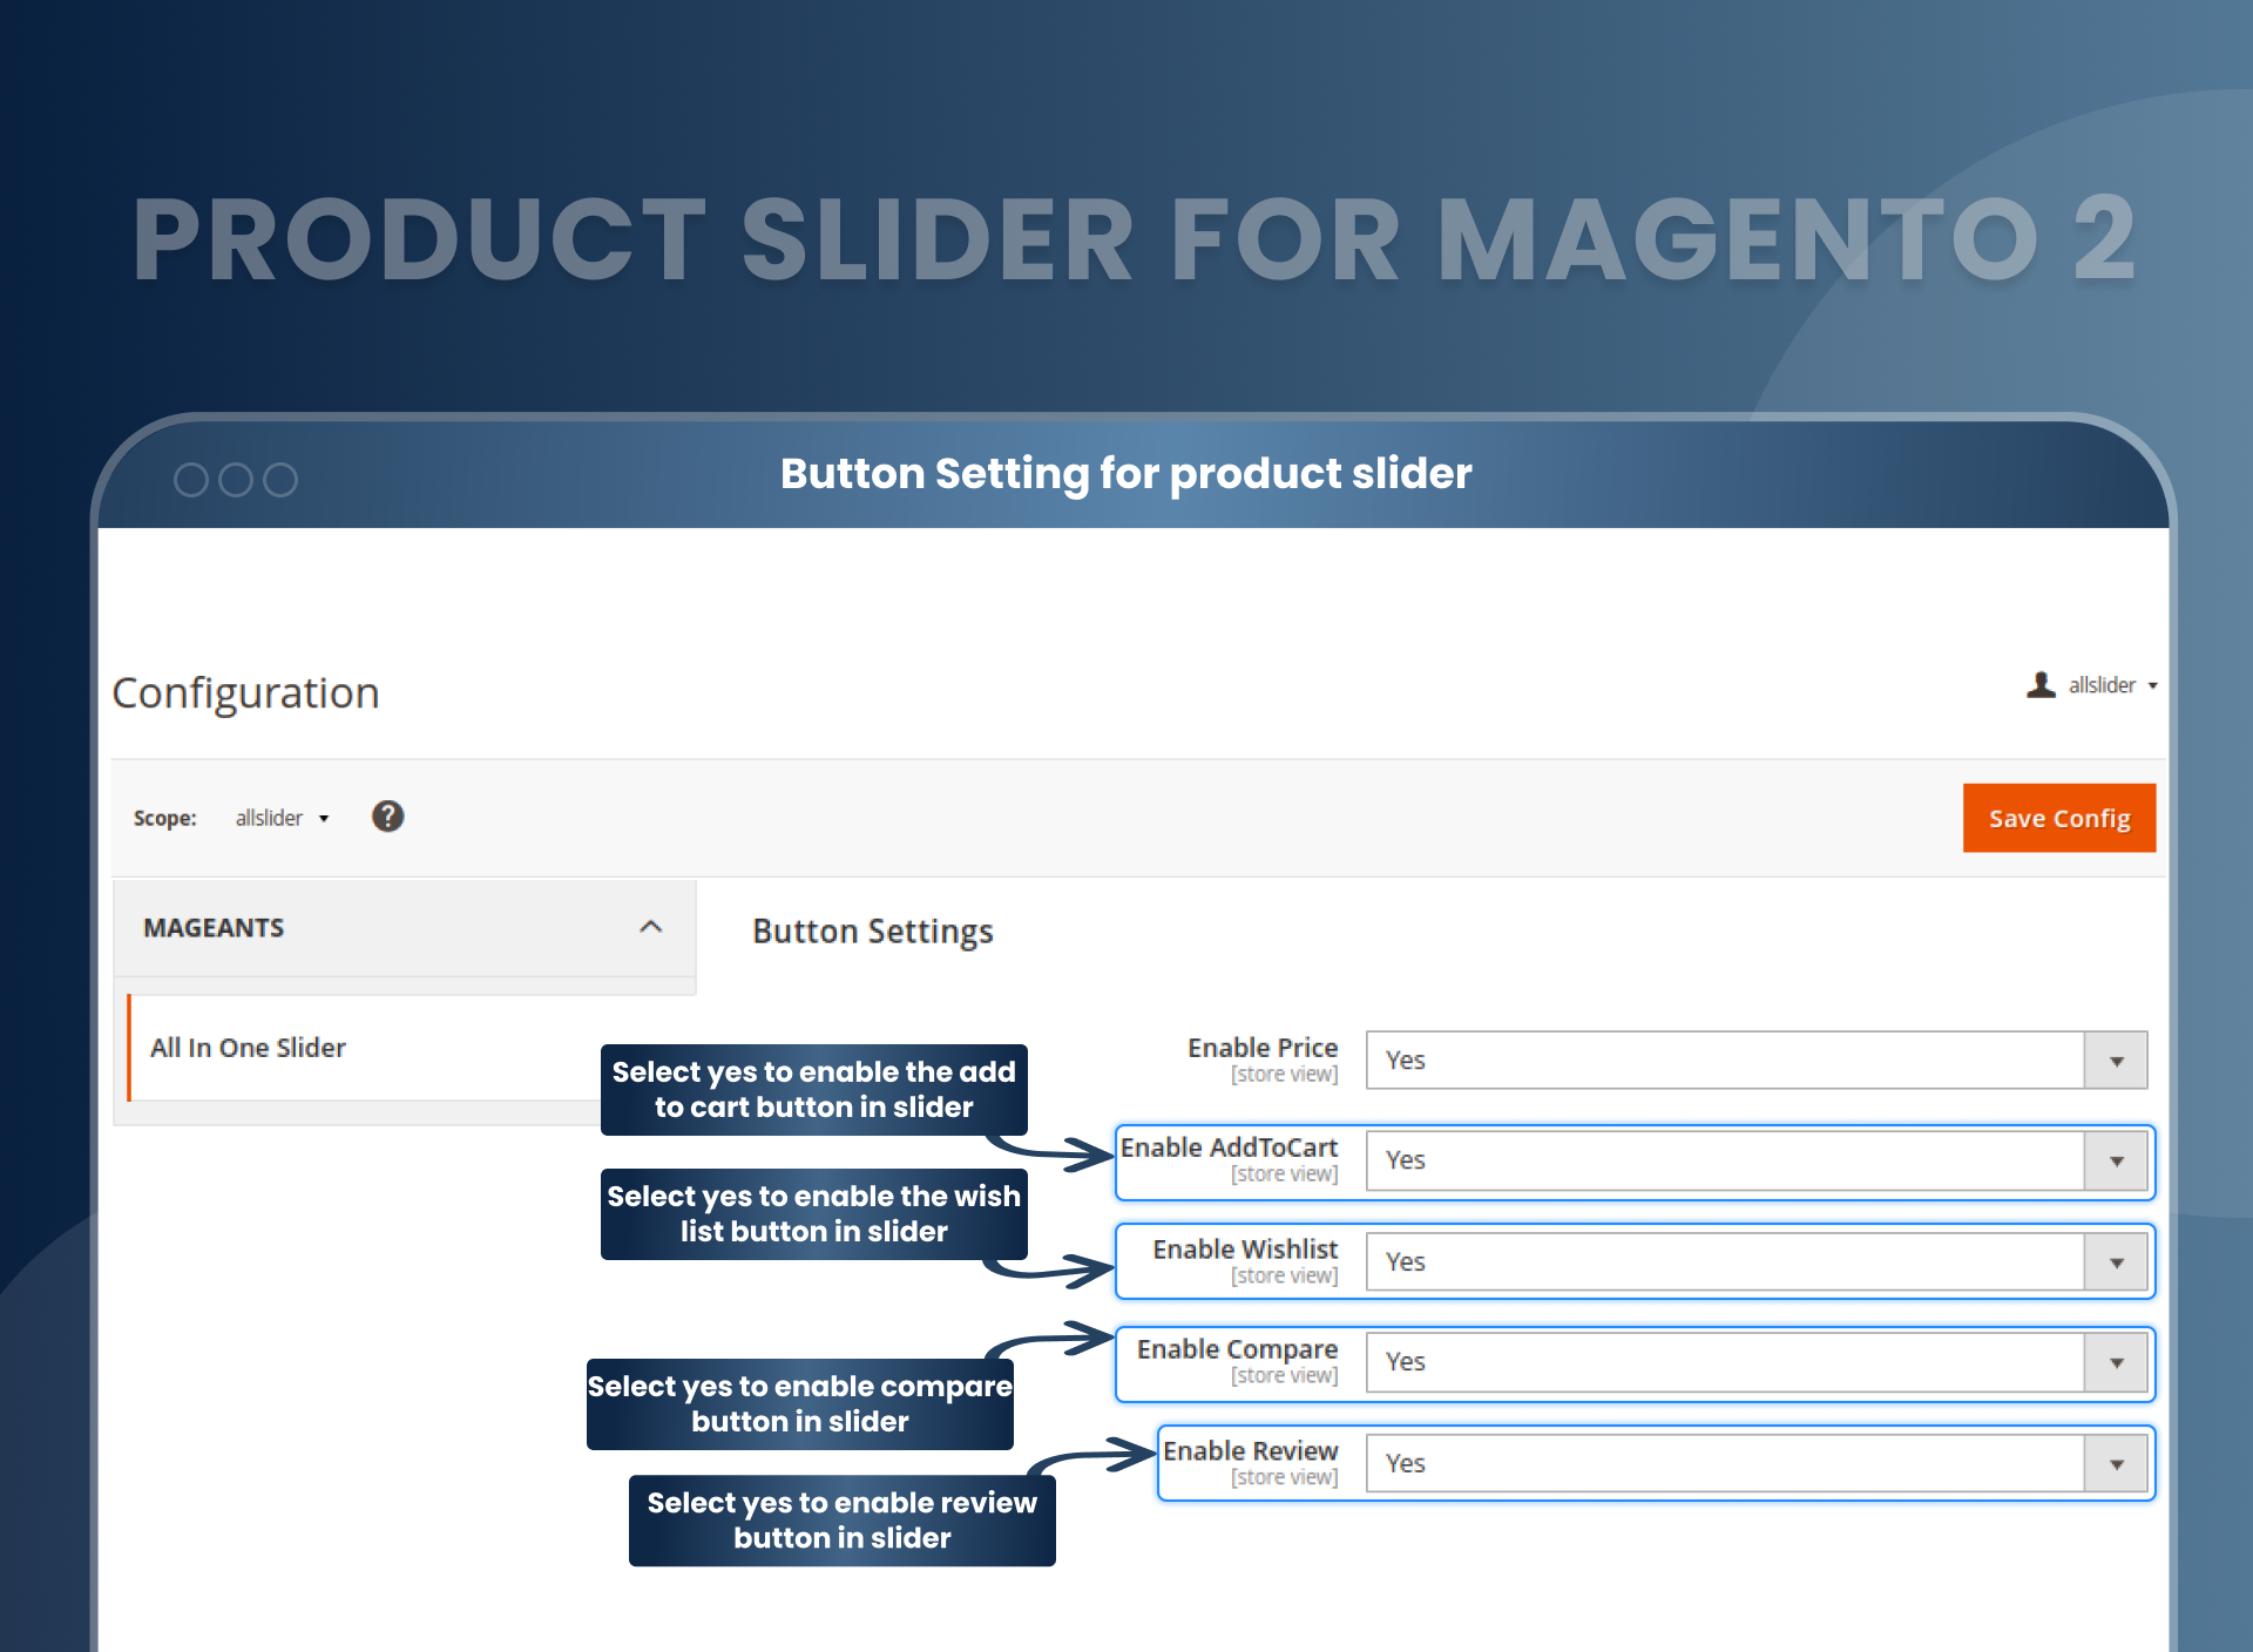 Button Setting for product slider